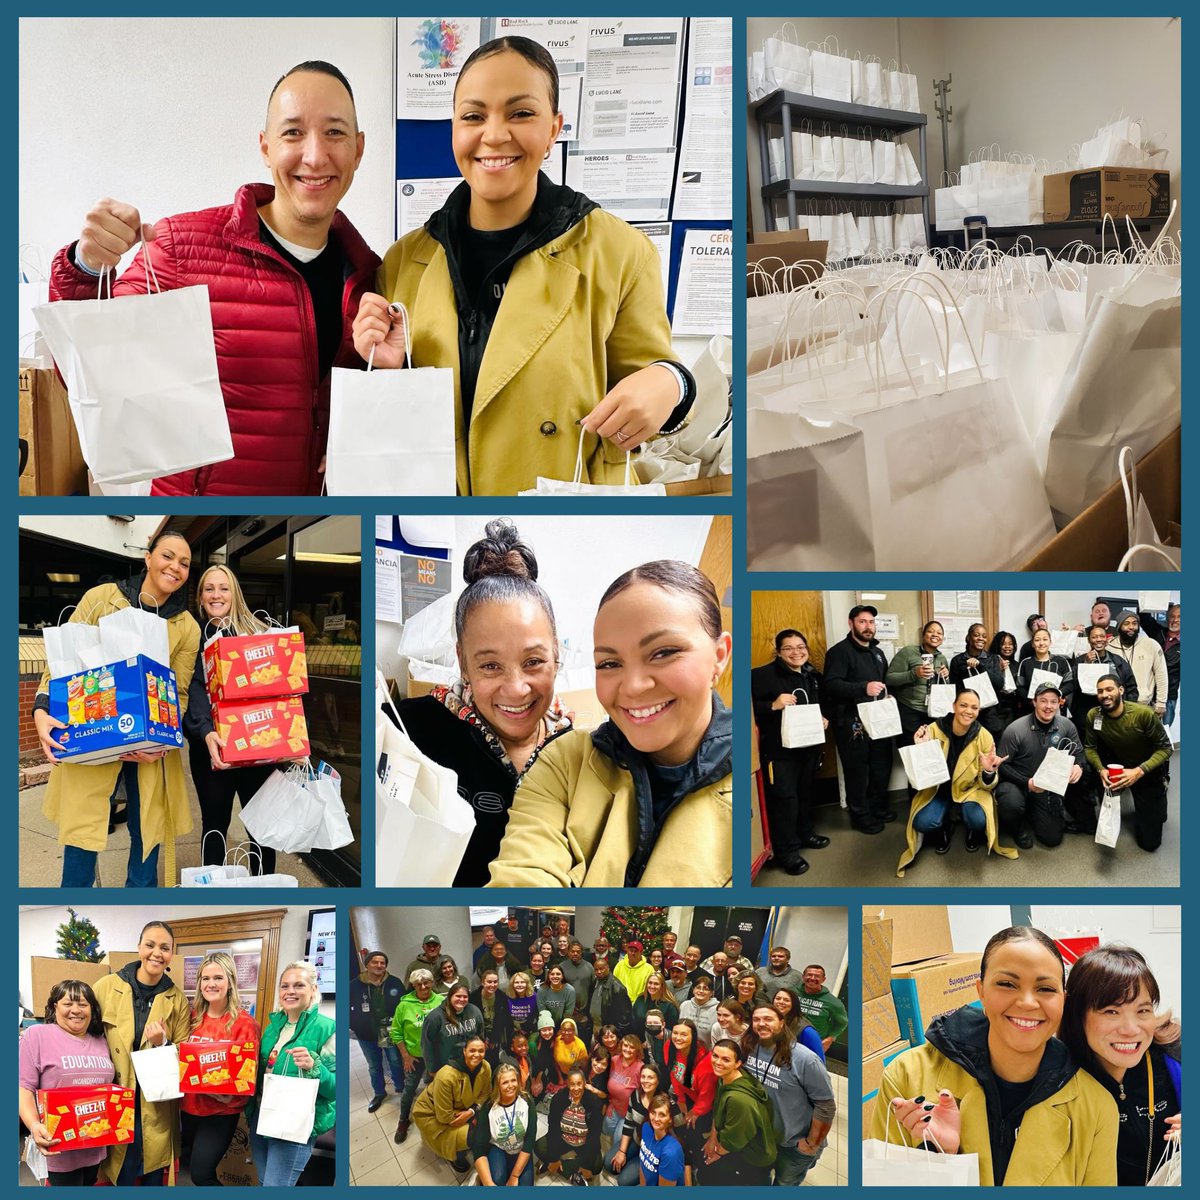 #Volunteer at the OCDC #MothersDayEvent this Saturday!
Volunteers will transport 1,500 gift bags to the OK County Detention Center and then hand out the bags to each person inside the facility.
Sign up here:forms.gle/rdL6UCuLP2UFd1…
#volunteersneeded #dogoodfeelgood #nonprofit